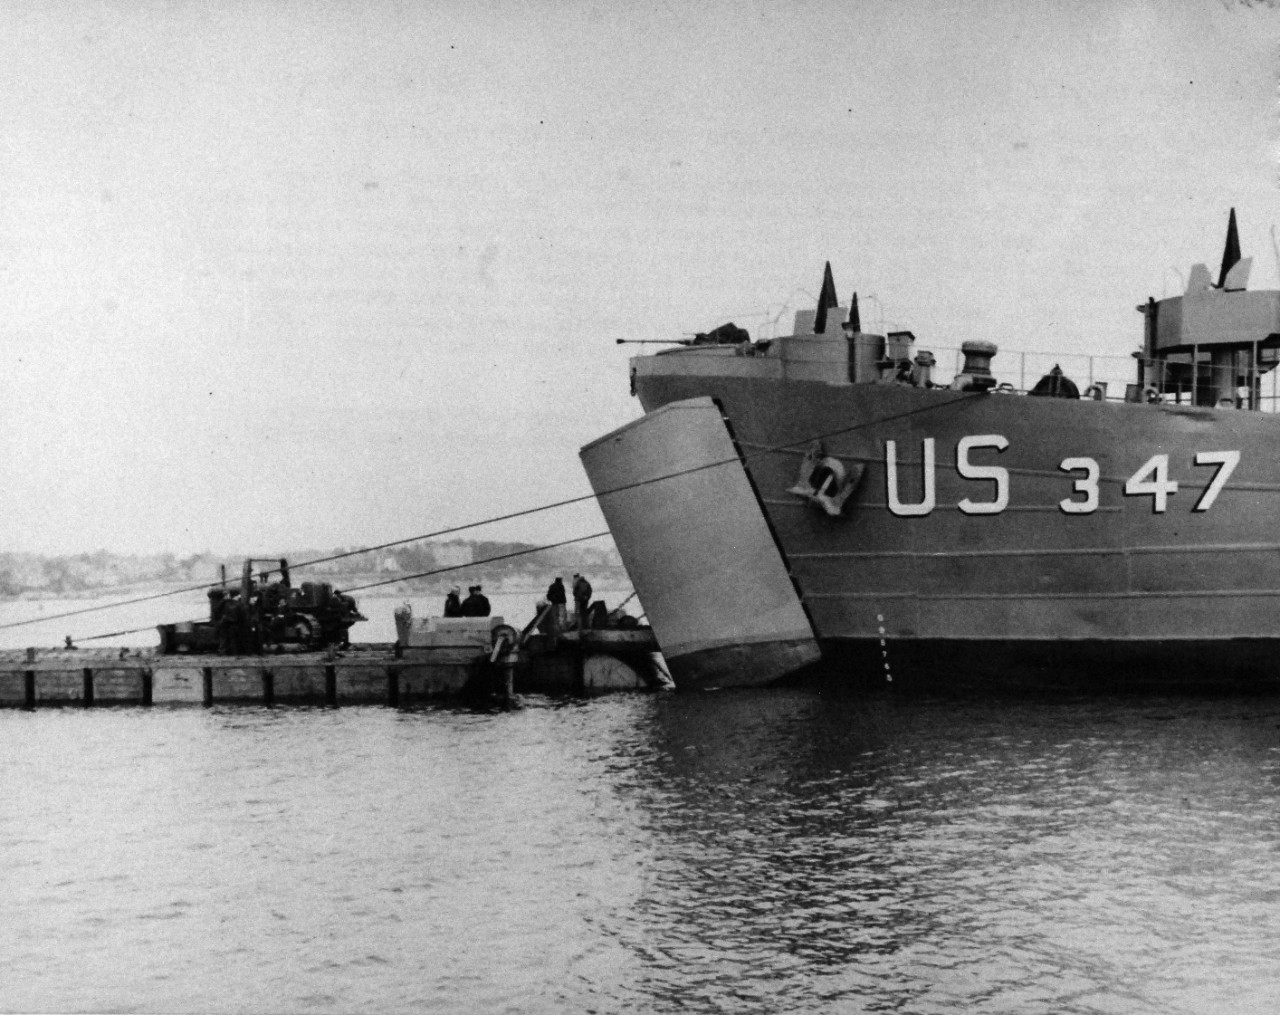 80-G-45672:  Normany Invasion, Rhino Ferry, June 1944.    “Rhino Ferries,” designed by Navy’s Civil Engineering Corps to bridge the gap between ship and shore, are pontoons powered by two outboard motors of 143 hp and complete with steering gear.  Ferries are formed of 30 pontoons in length by 6’ wide, displaced approximately 275 tons, speed of about 4 knots and a shallower draft than LST’s.   Cargo begins to flow out of the open bow of LST 347 following its marriage to a Rhino Ferry.   Photograph released June 6, 1944.    Official U.S. Navy Photograph, now in the collections of the National Archives.  (2014/9/9).  